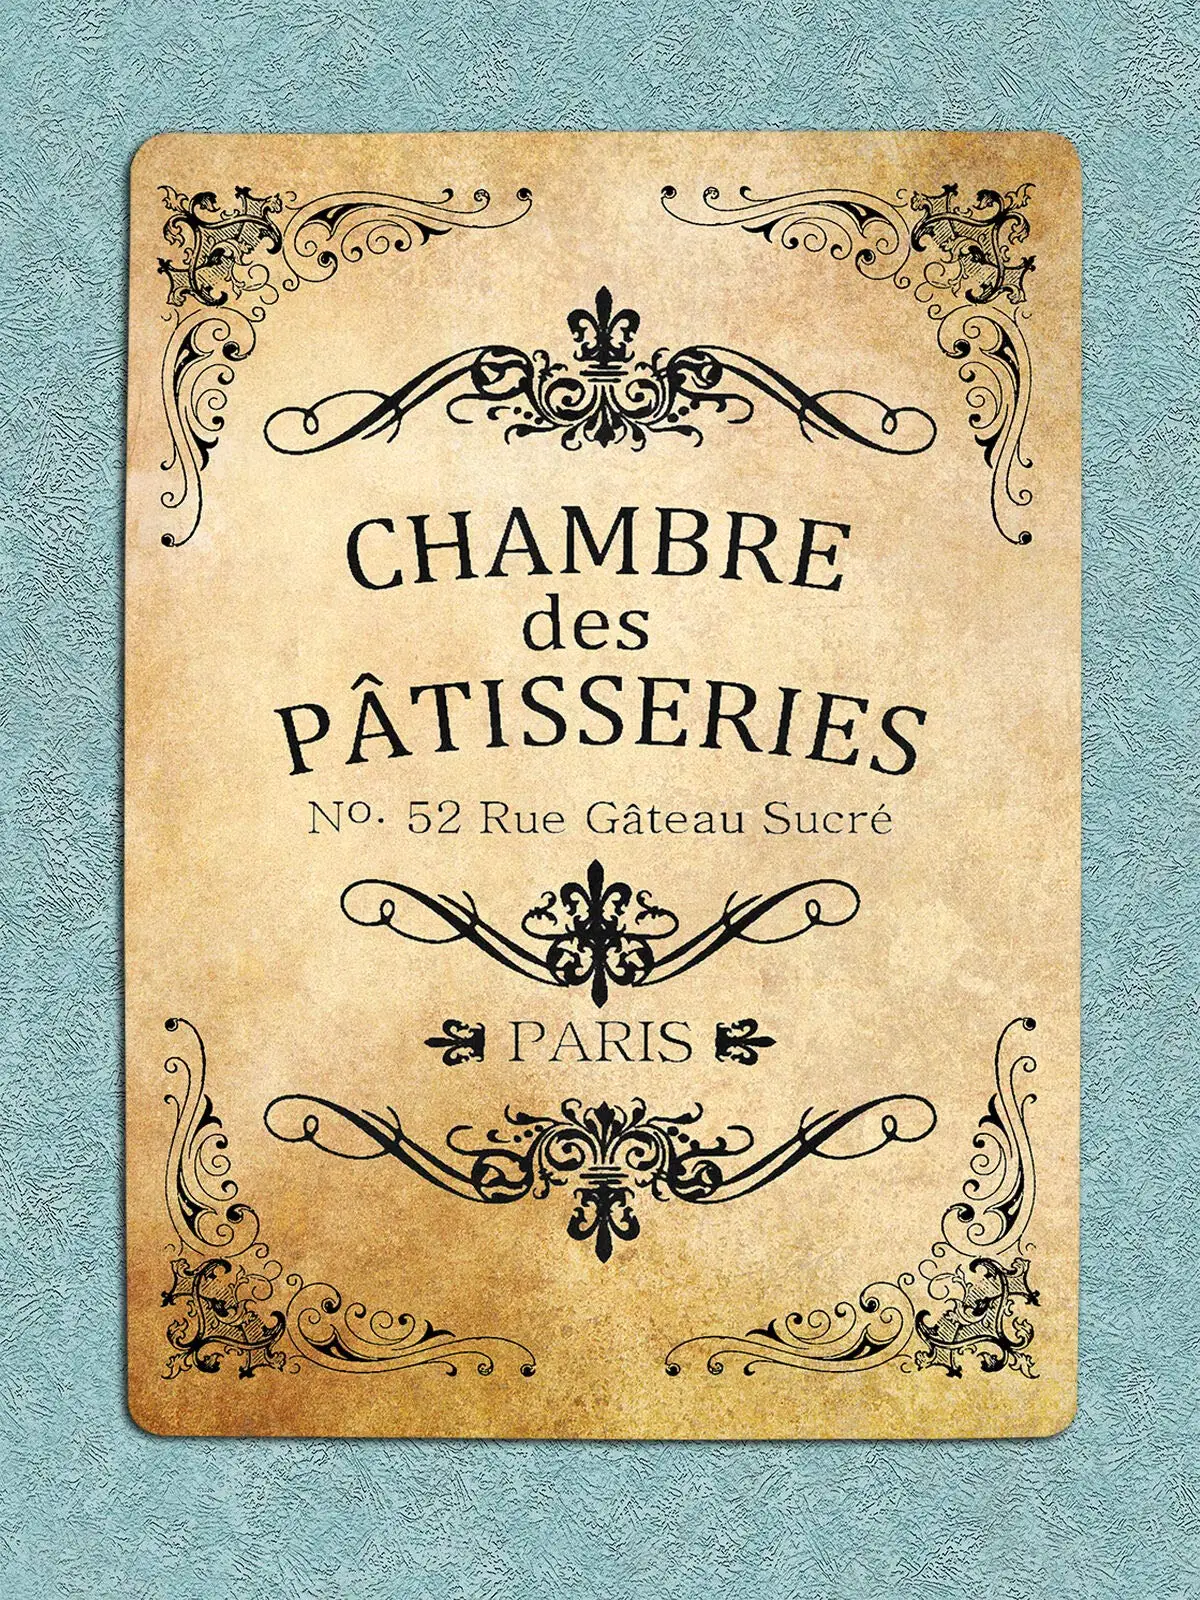 

New Vintage Metal French Paris Chamber Des Patisseries Pastry Room Street Garage & Home Bar Club Kitchen Hotel Wall Decor M